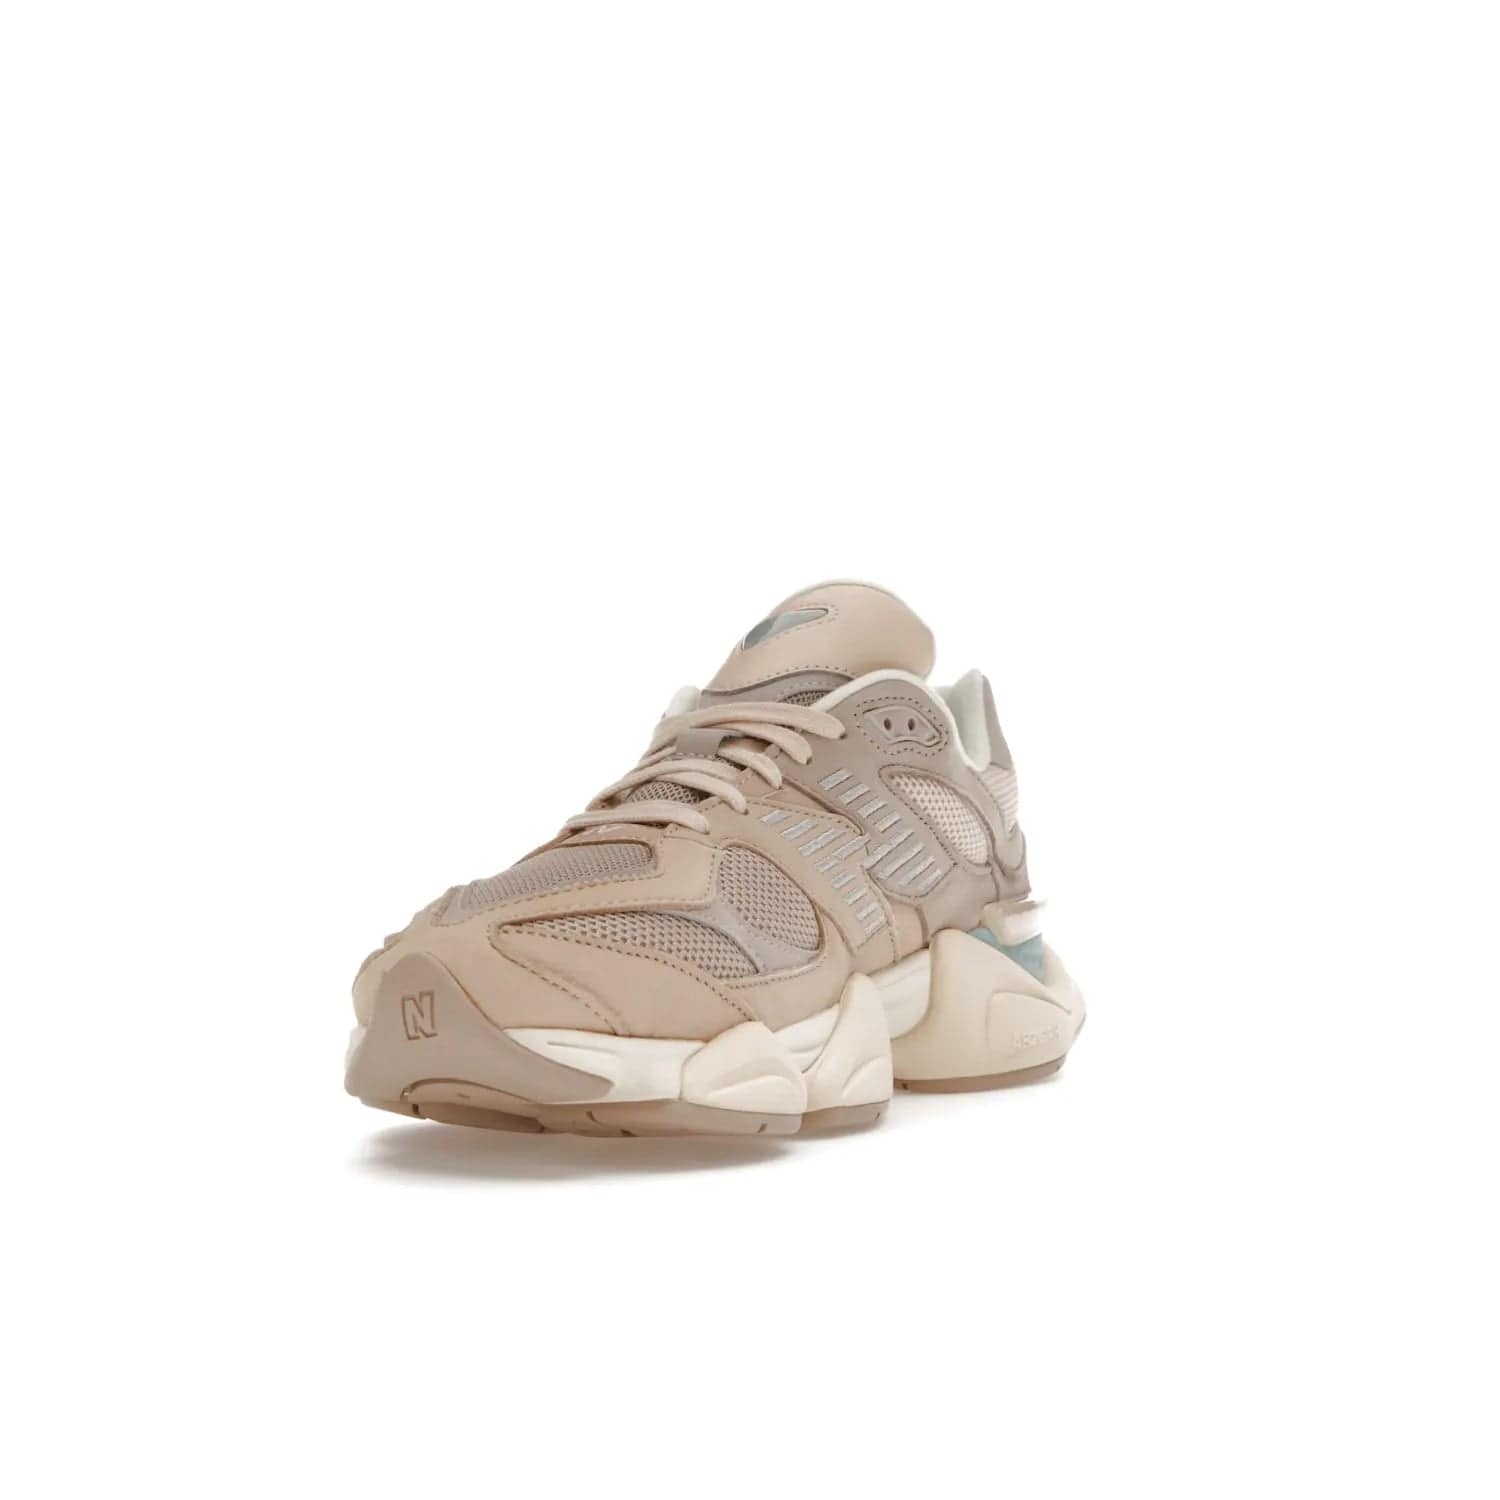 New Balance 9060 Ivory Cream Pink Sand - Image 13 - Only at www.BallersClubKickz.com - New Balance 9060 Ivory Cream Pink Sand - Sleek meshed upper, premium suede overlays, ABZORB cushioning. Get this unique sneaker ahead of the trend, launching December 6th, 2022!